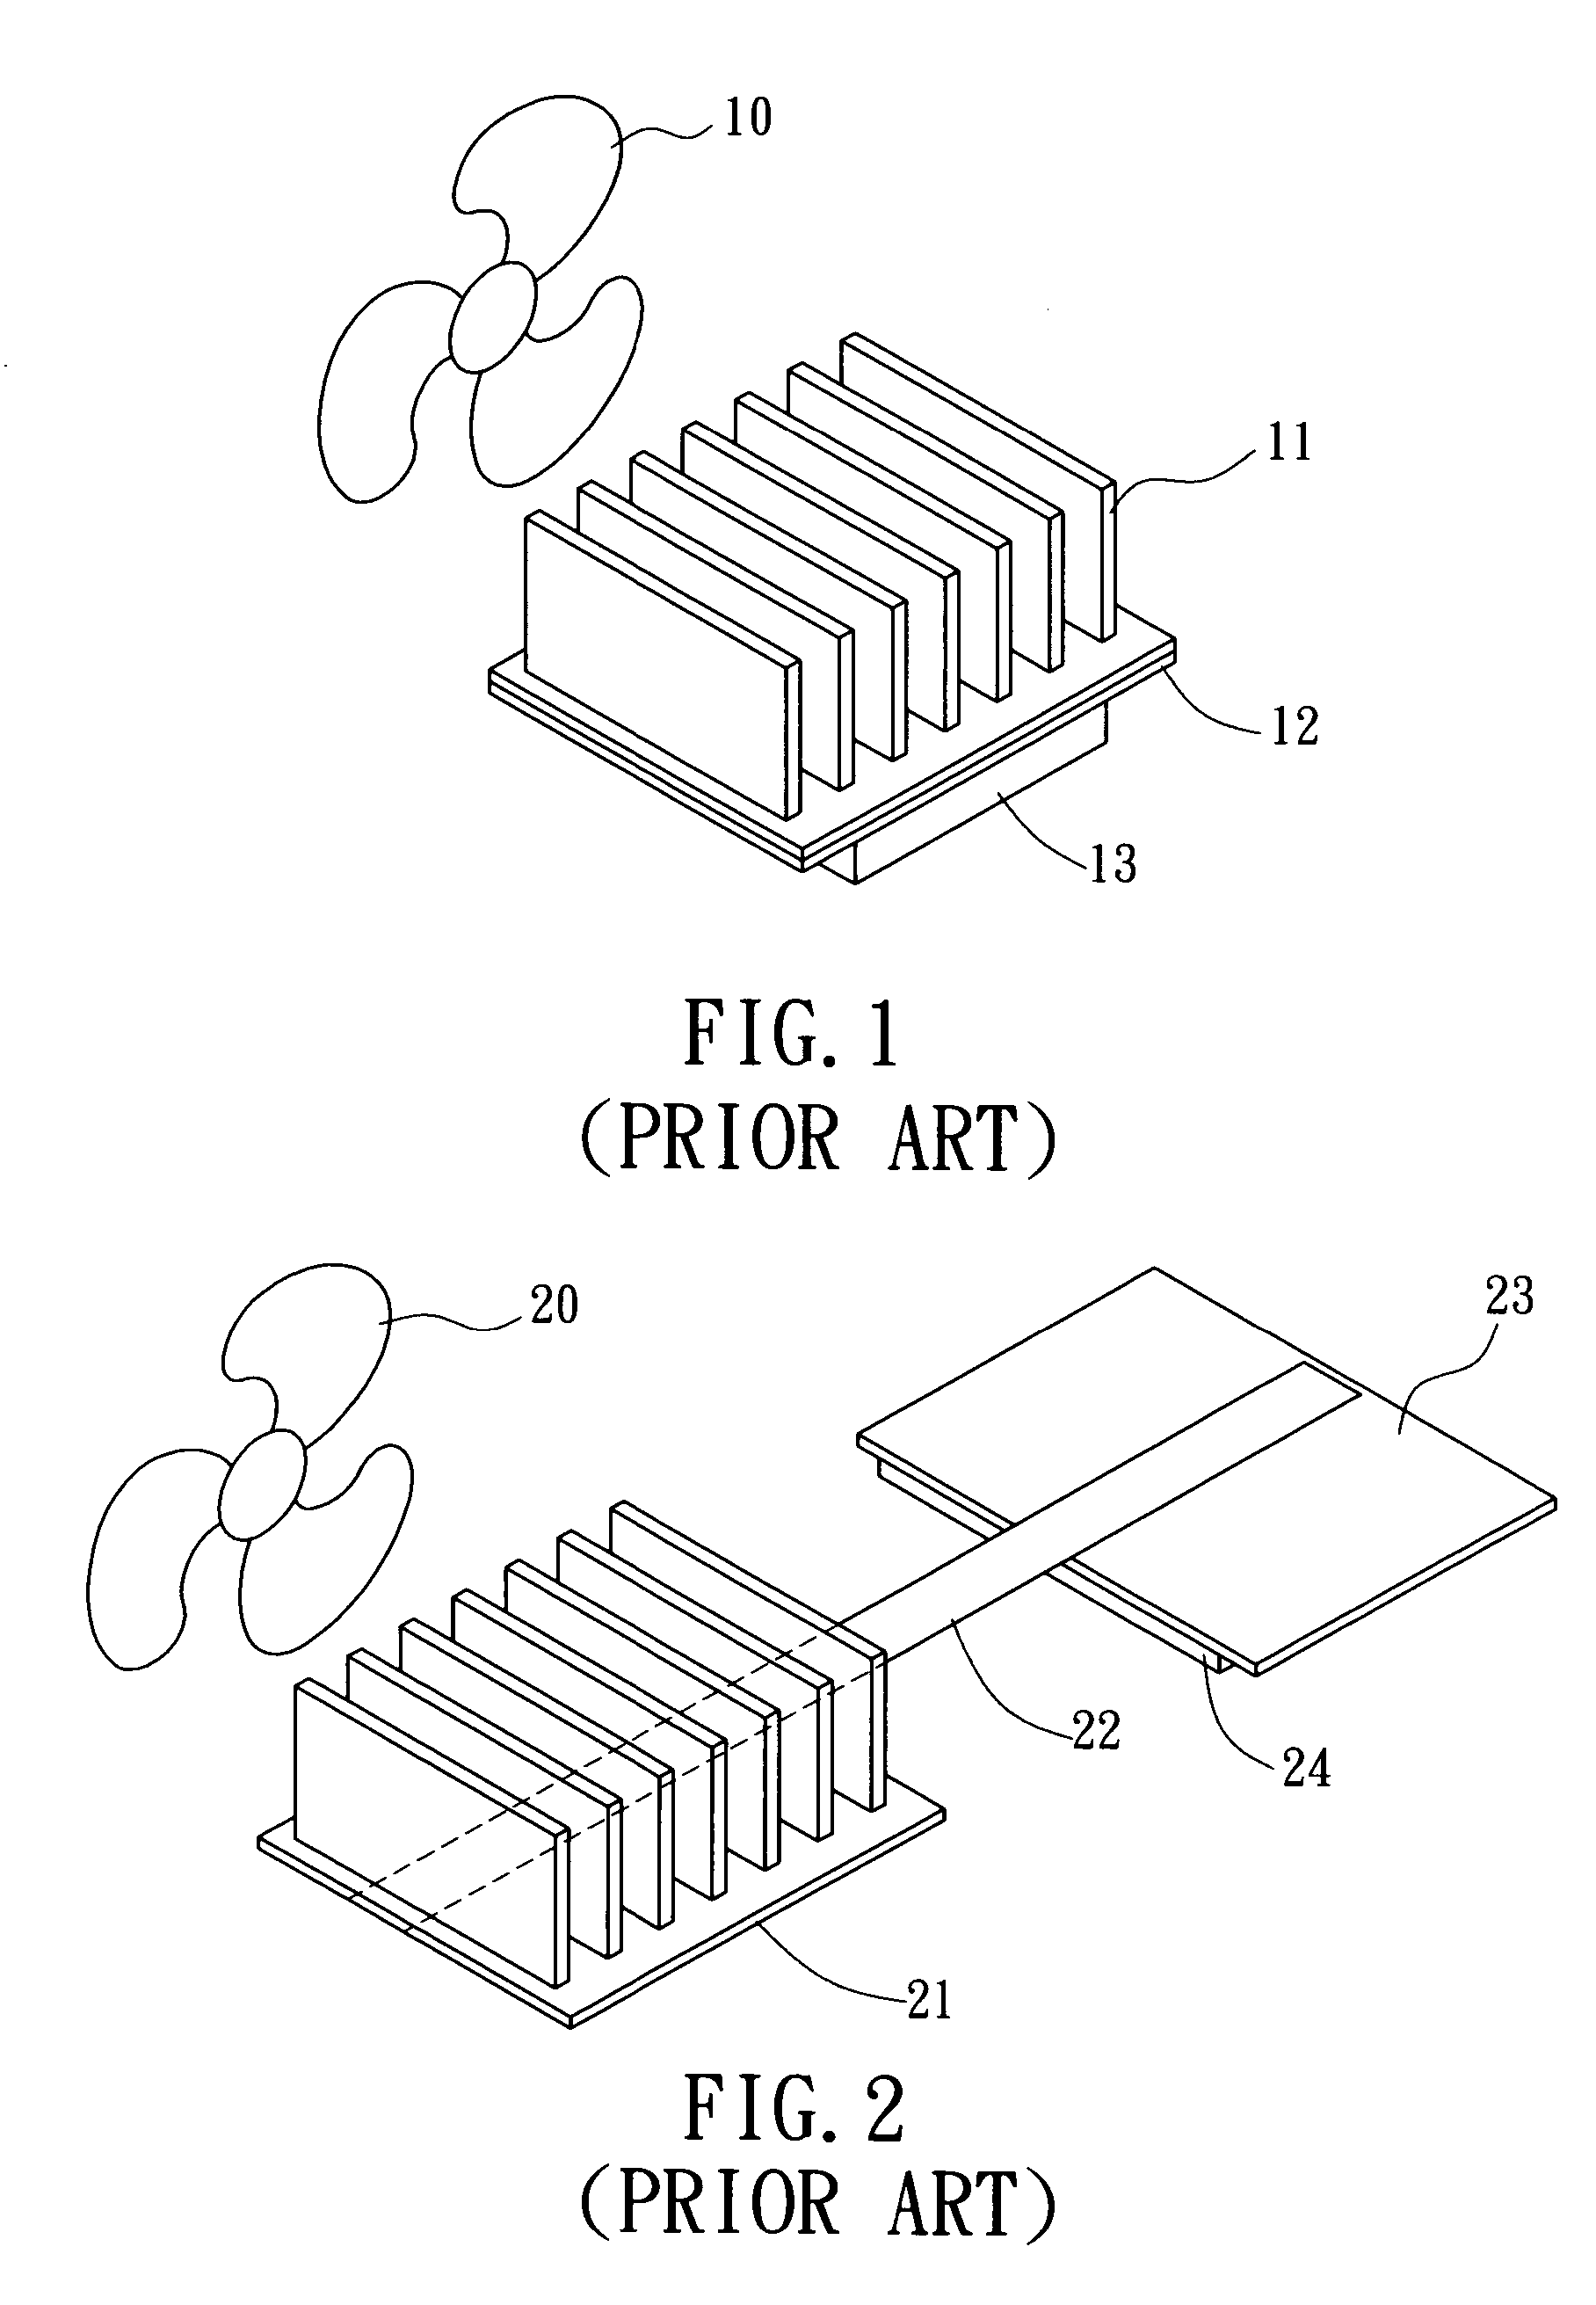 Thermal module with heat reservoir and method of applying the same on electronic products